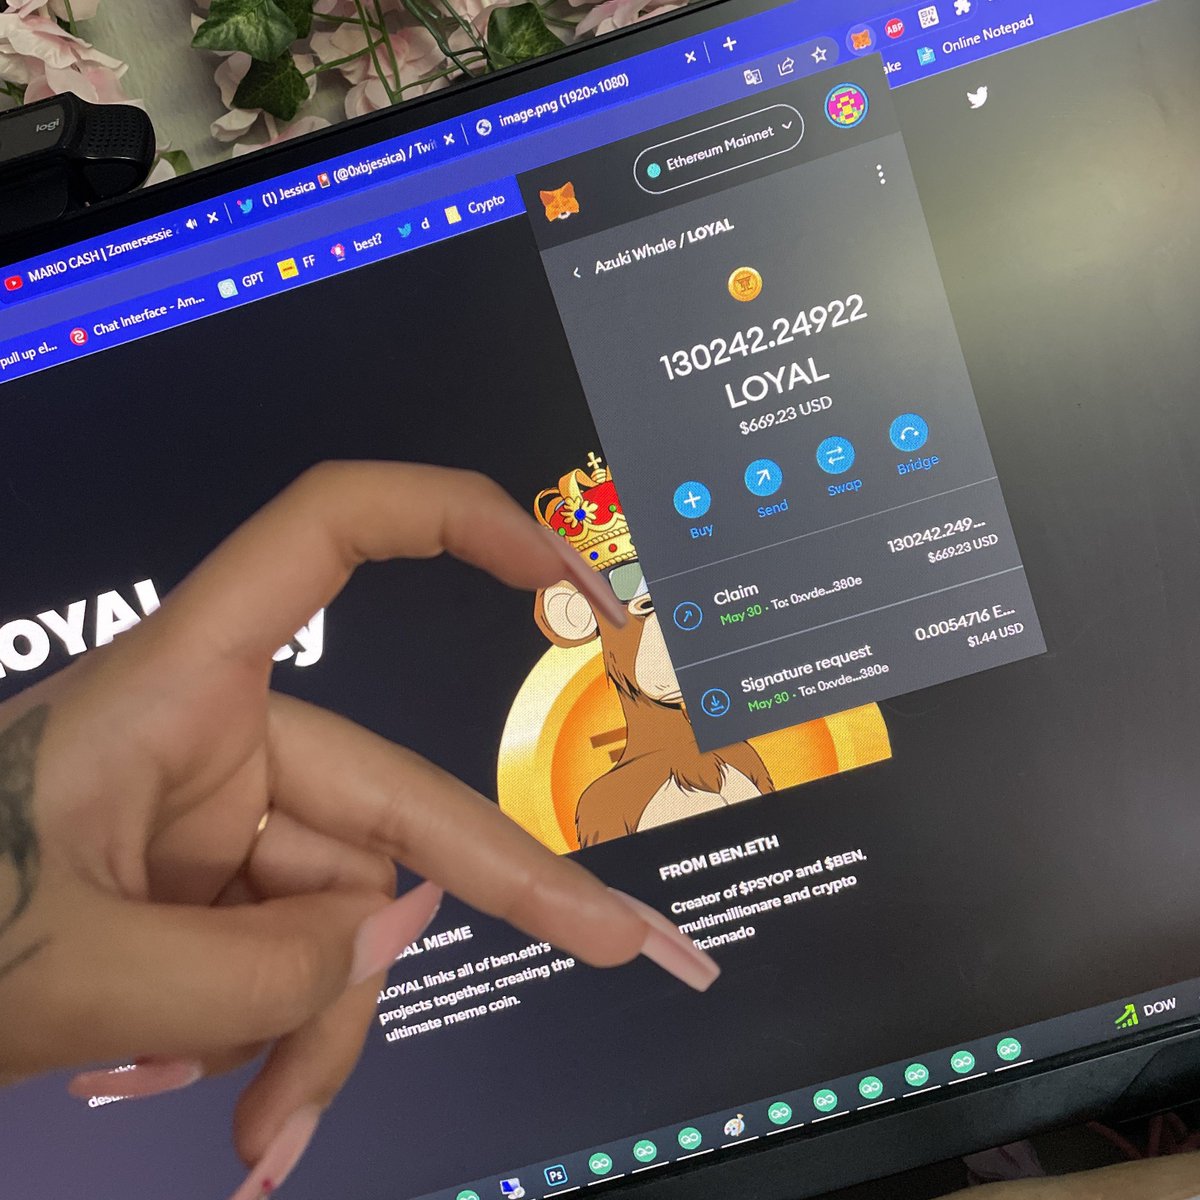 omg i just claimed $670 from the $LOYAL airdrop? claim now 👇 🔗 loyalty.holdings 🎁 #NFTs $HEX #SEC #ETH #altcoins $LINK $DOGE $XRP $PEPE $MONG $BOB $WAGMI $MATIC $CAW $SHIB $FLOKI $DAVE $PSYOP $BEN #USDT $BTC $ADA #crypto #WOJAK #MATIC BTC and ETH $HABIBI